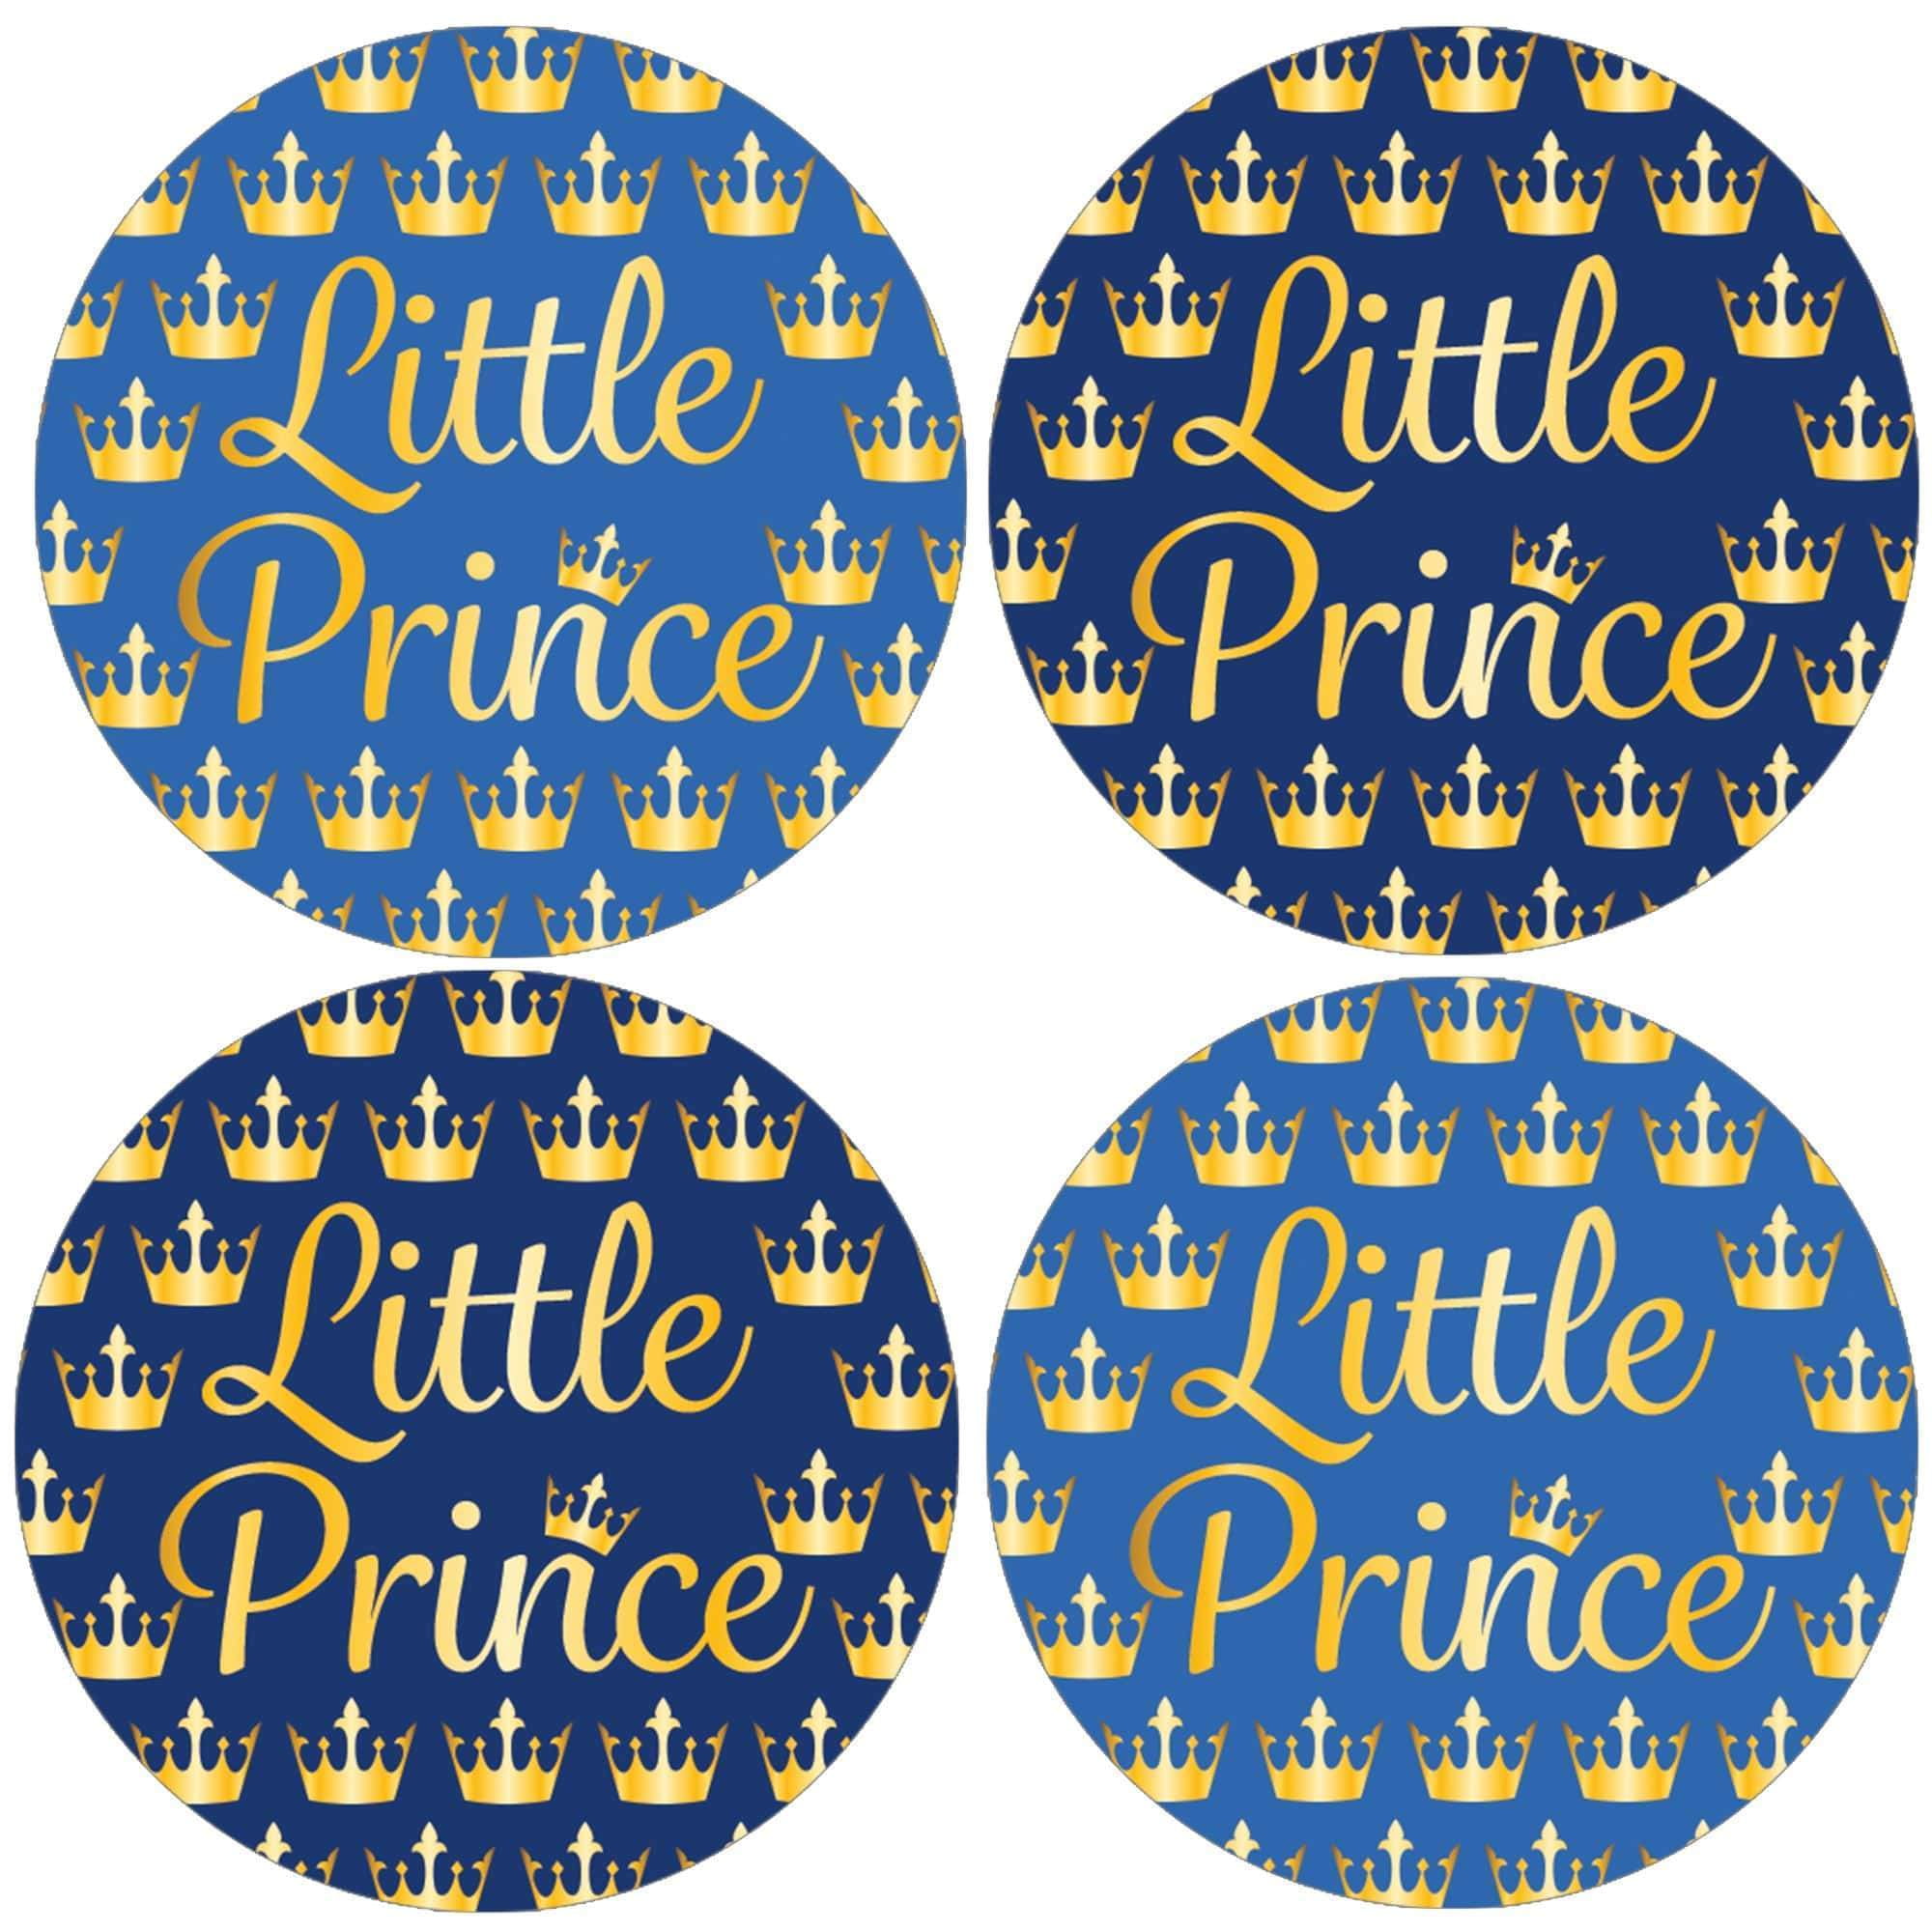 BLUE SILVER AND GOLD PRINCE CROWN BABY SHOWER ROUND LABELS PARTY STICKERS FAVORS 